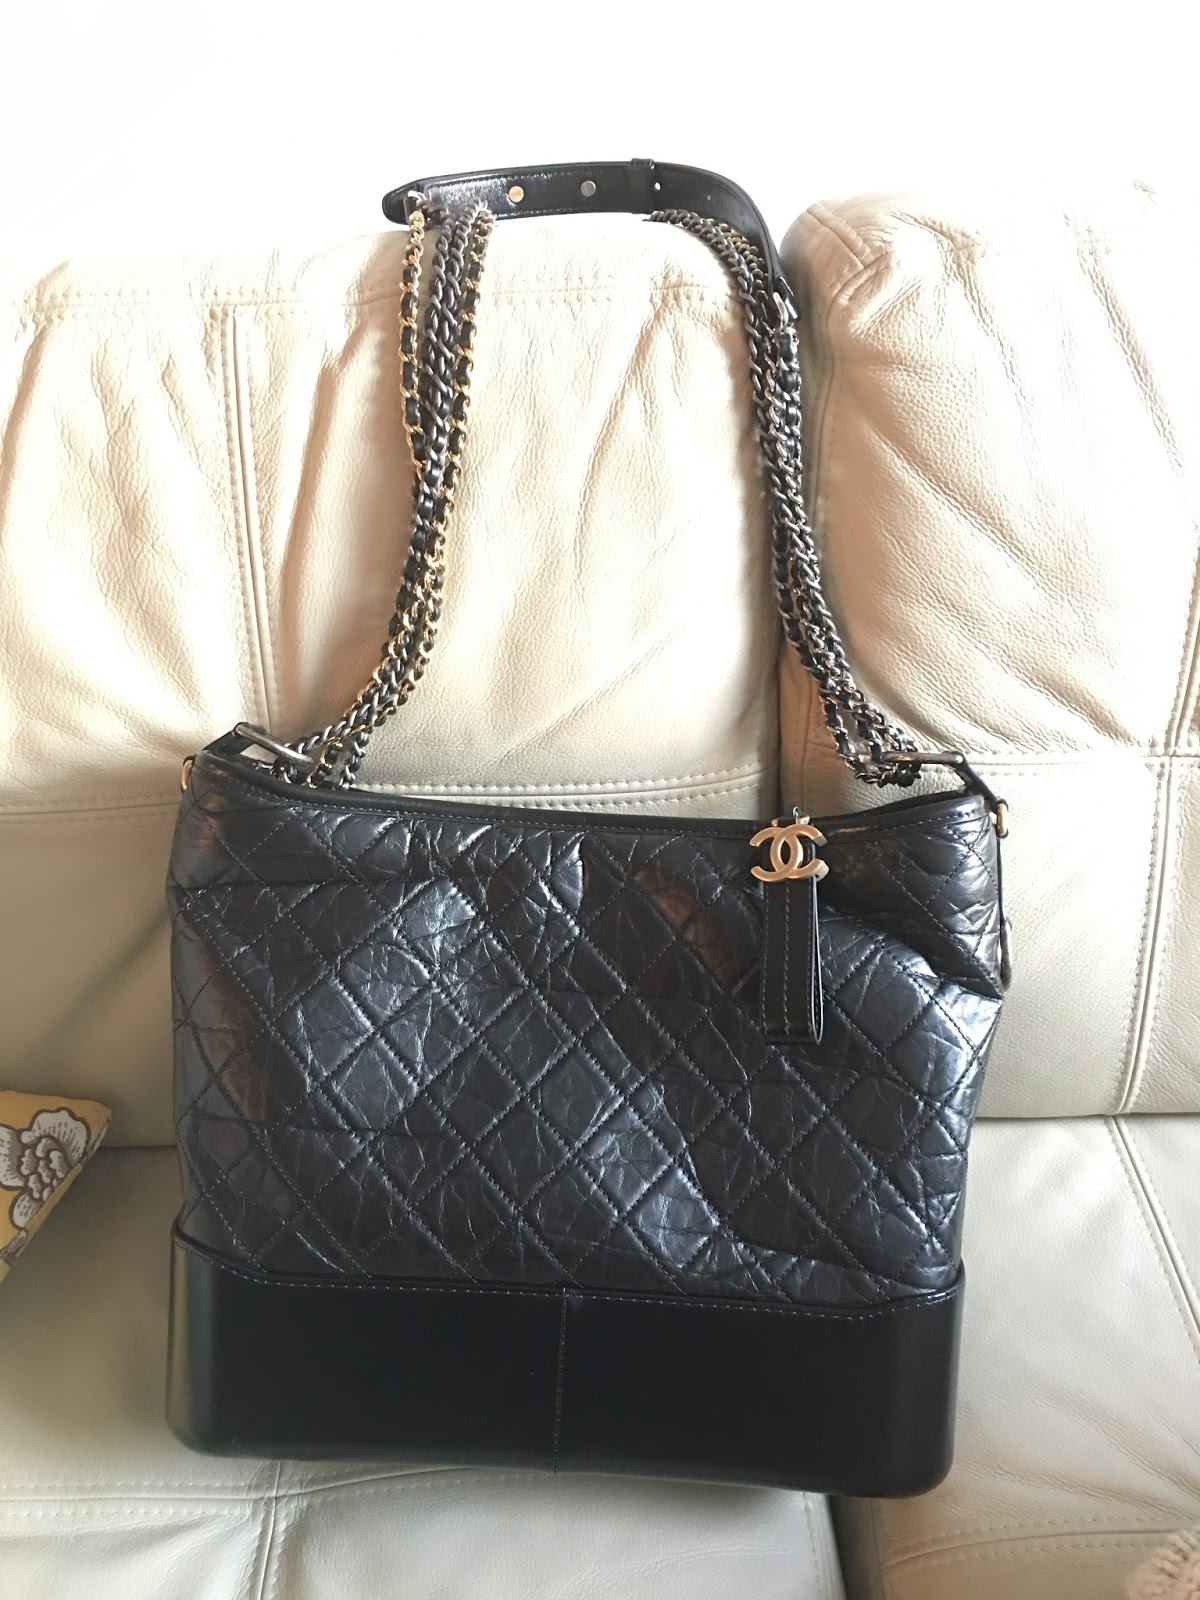 Chanel Gabrielle Small Bag Review. Wear and Tear! Will I Buy it